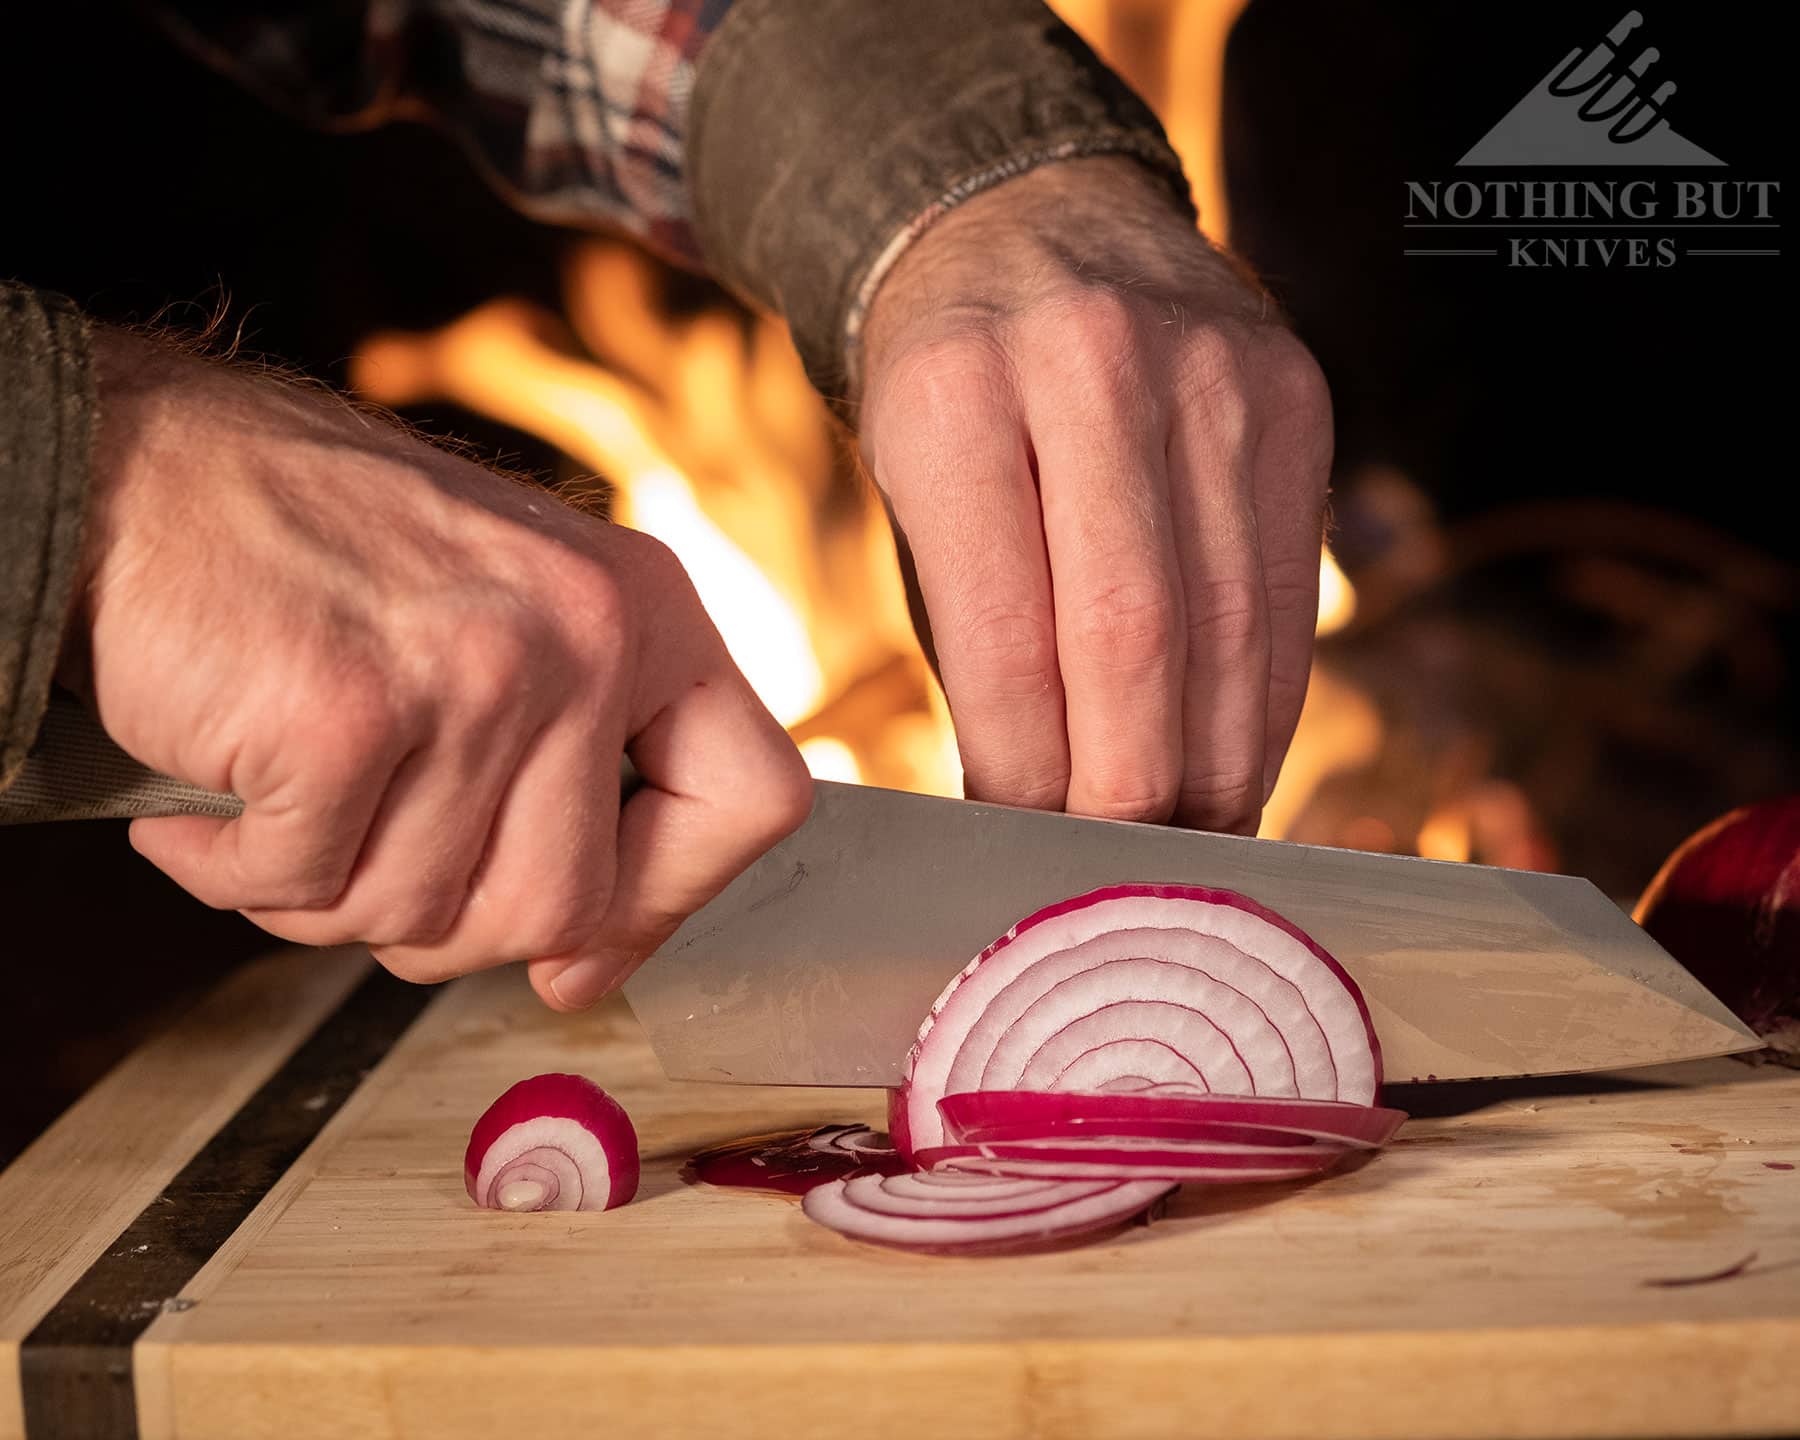 The Overland che knife is a good option for overlanding or camping trips. Here it is being used to slice up an onion next to a campfire on a camping trip.